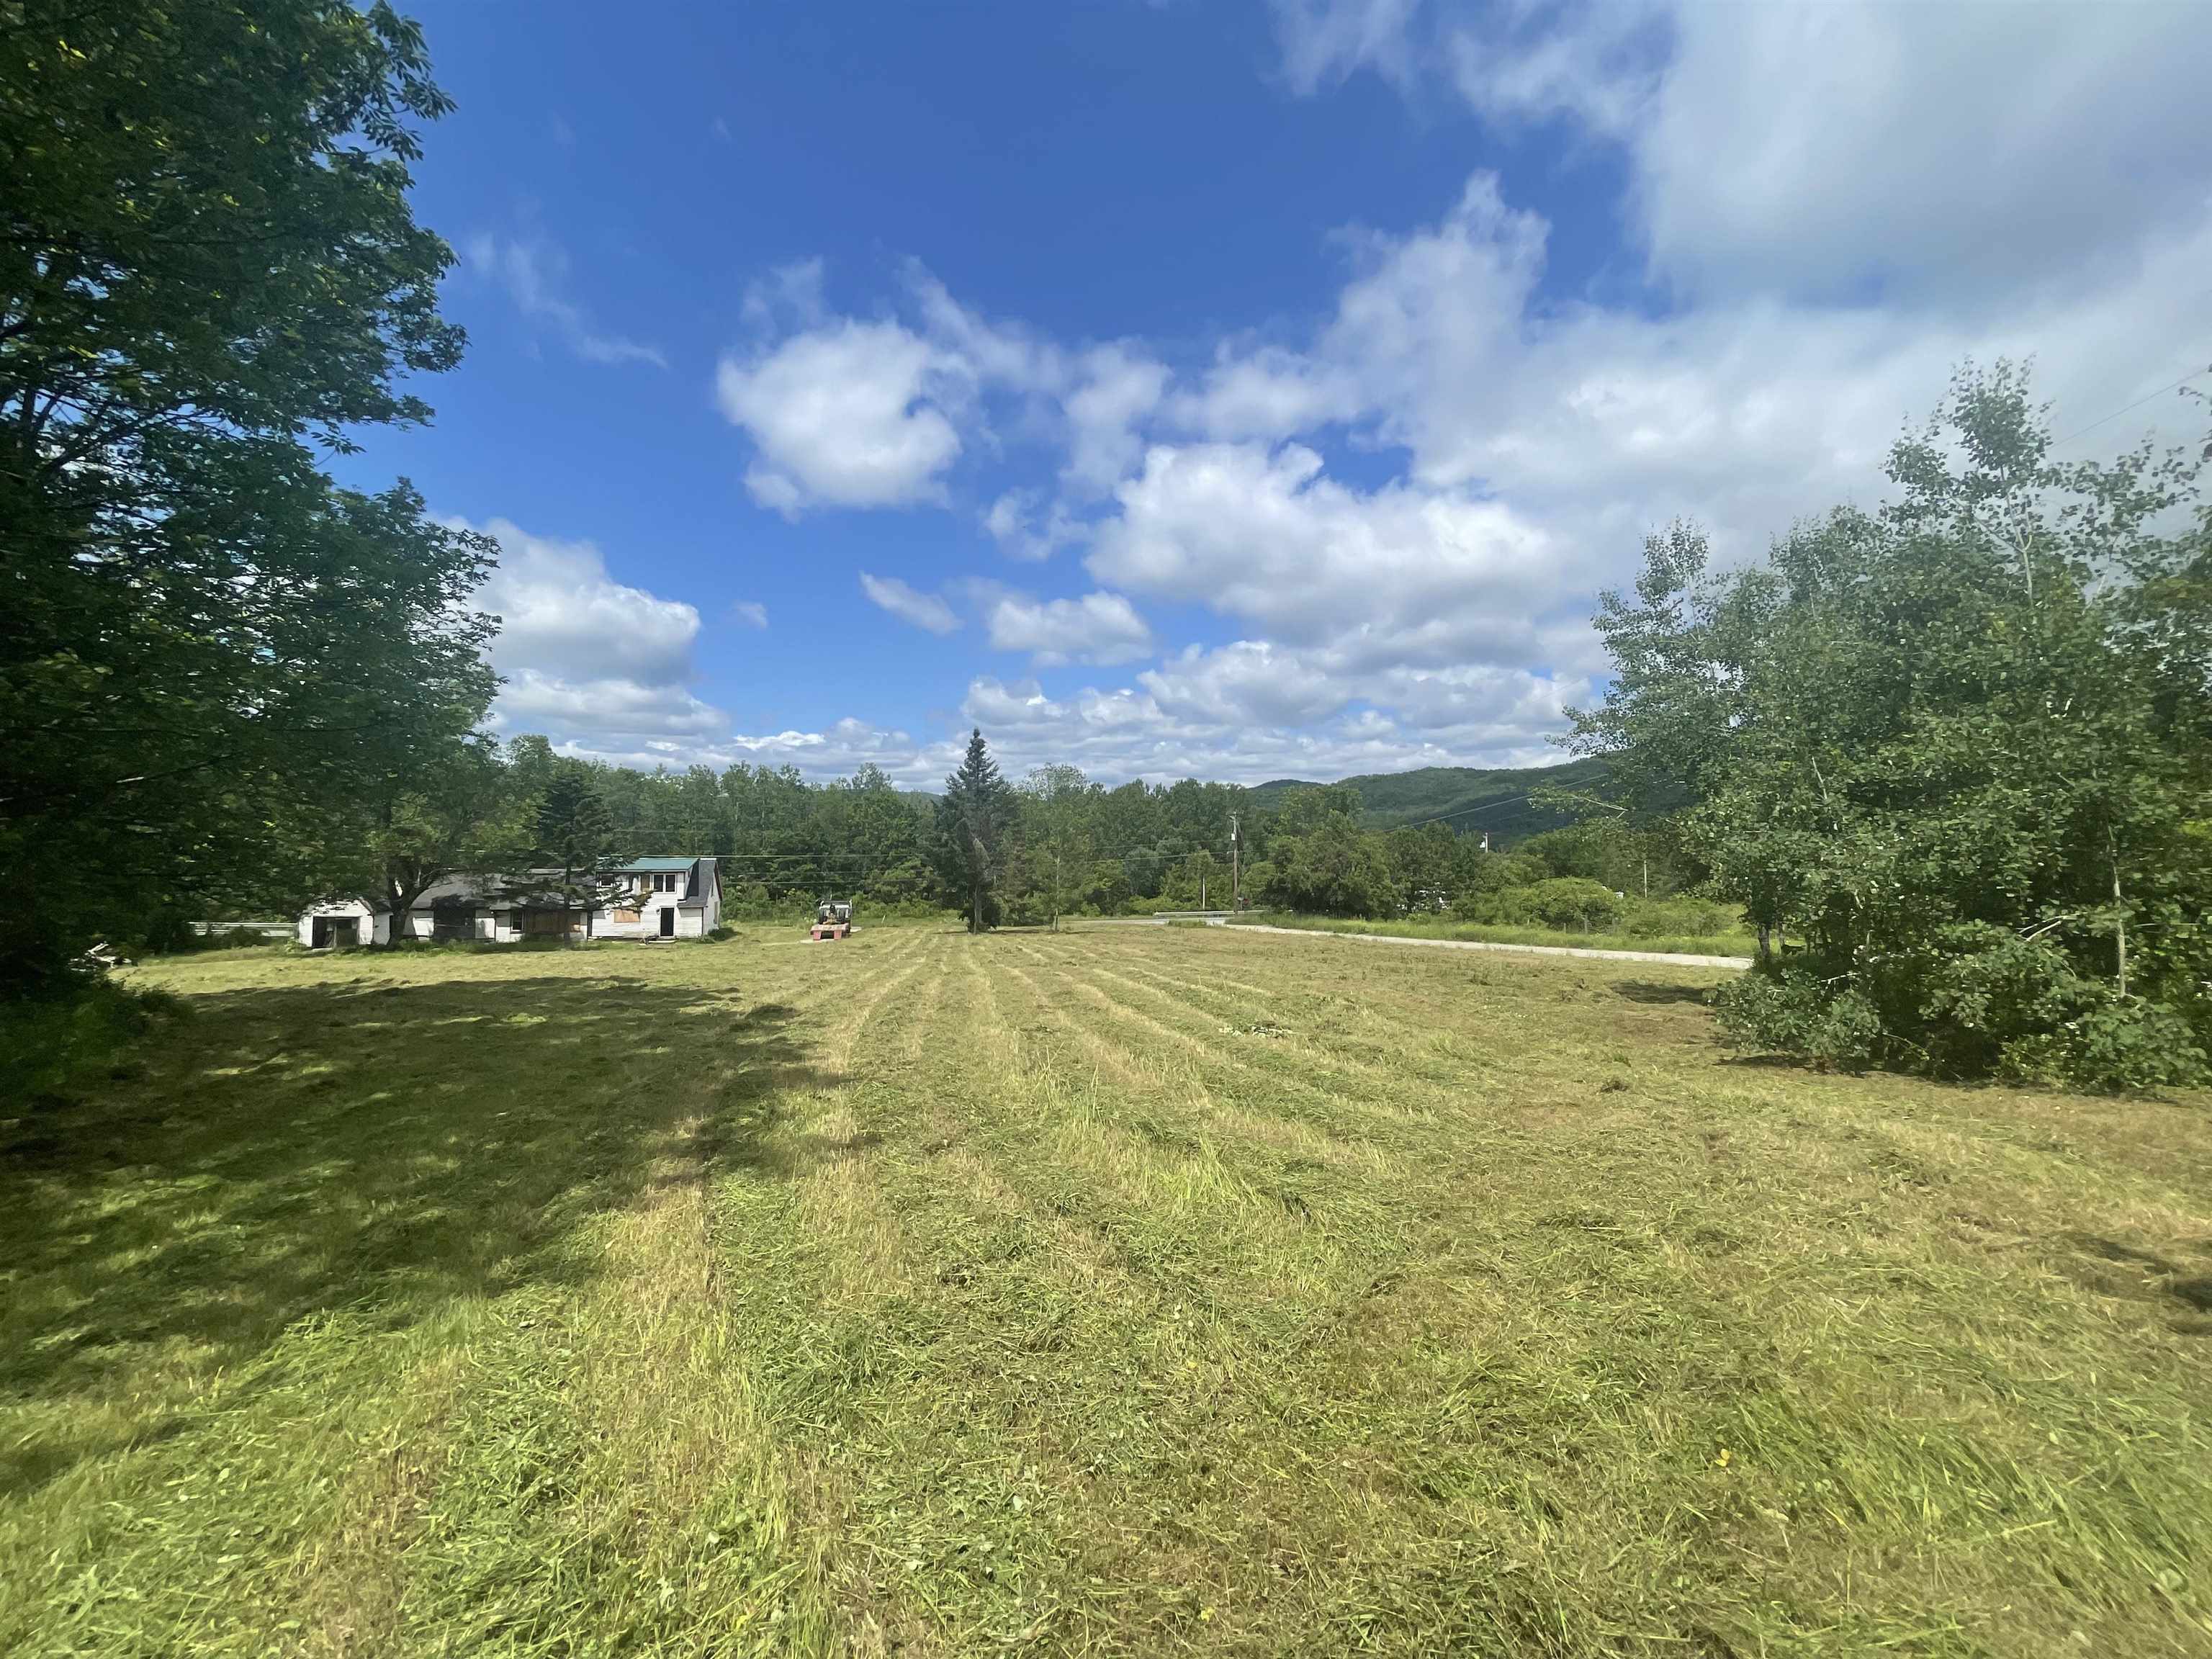 Commercial property ,Townshend Vermont ,3.6 acre...